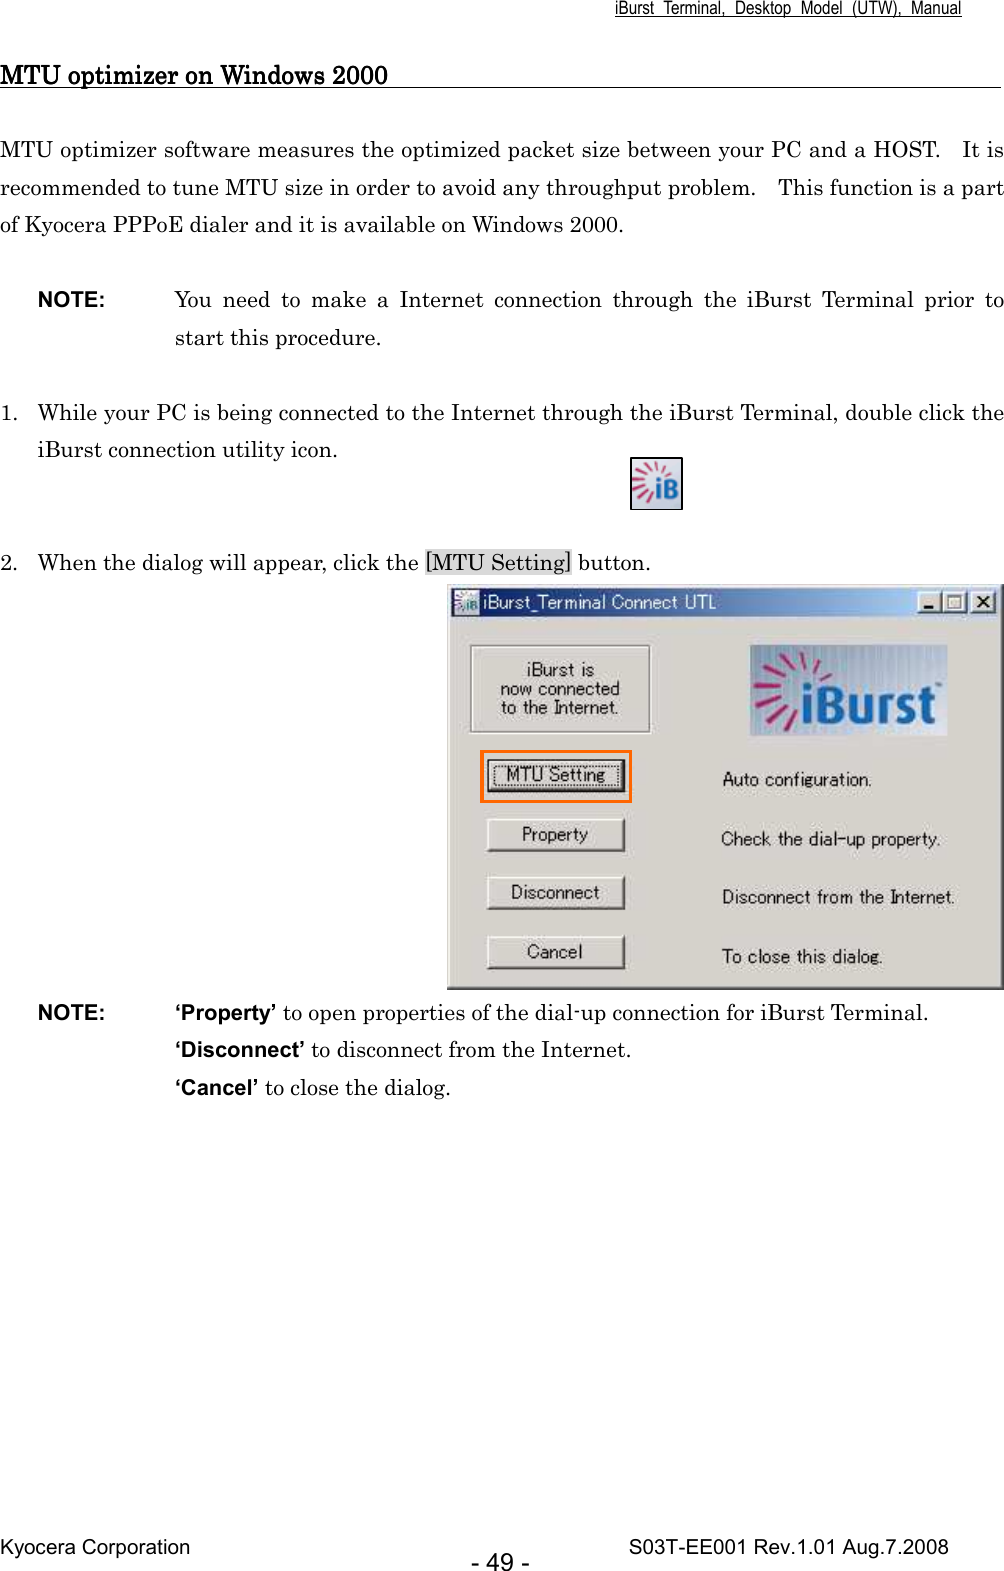 iBurst  Terminal,  Desktop  Model  (UTW),  Manual Kyocera Corporation                                                                                    S03T-EE001 Rev.1.01 Aug.7.2008 - 49 - MTU optimizer on Windows 2000                                                                                                 MTU optimizer on Windows 2000                                                                                                 MTU optimizer on Windows 2000                                                                                                 MTU optimizer on Windows 2000                                                                                                       MTU optimizer software measures the optimized packet size between your PC and a HOST.    It is recommended to tune MTU size in order to avoid any throughput problem.    This function is a part of Kyocera PPPoE dialer and it is available on Windows 2000.  NOTE:  You  need  to  make  a  Internet  connection  through  the  iBurst  Terminal  prior  to start this procedure.  1. While your PC is being connected to the Internet through the iBurst Terminal, double click the iBurst connection utility icon.   2. When the dialog will appear, click the [MTU Setting] button.  NOTE:  ‘Property’ to open properties of the dial-up connection for iBurst Terminal. ‘Disconnect’ to disconnect from the Internet. ‘Cancel’ to close the dialog.  